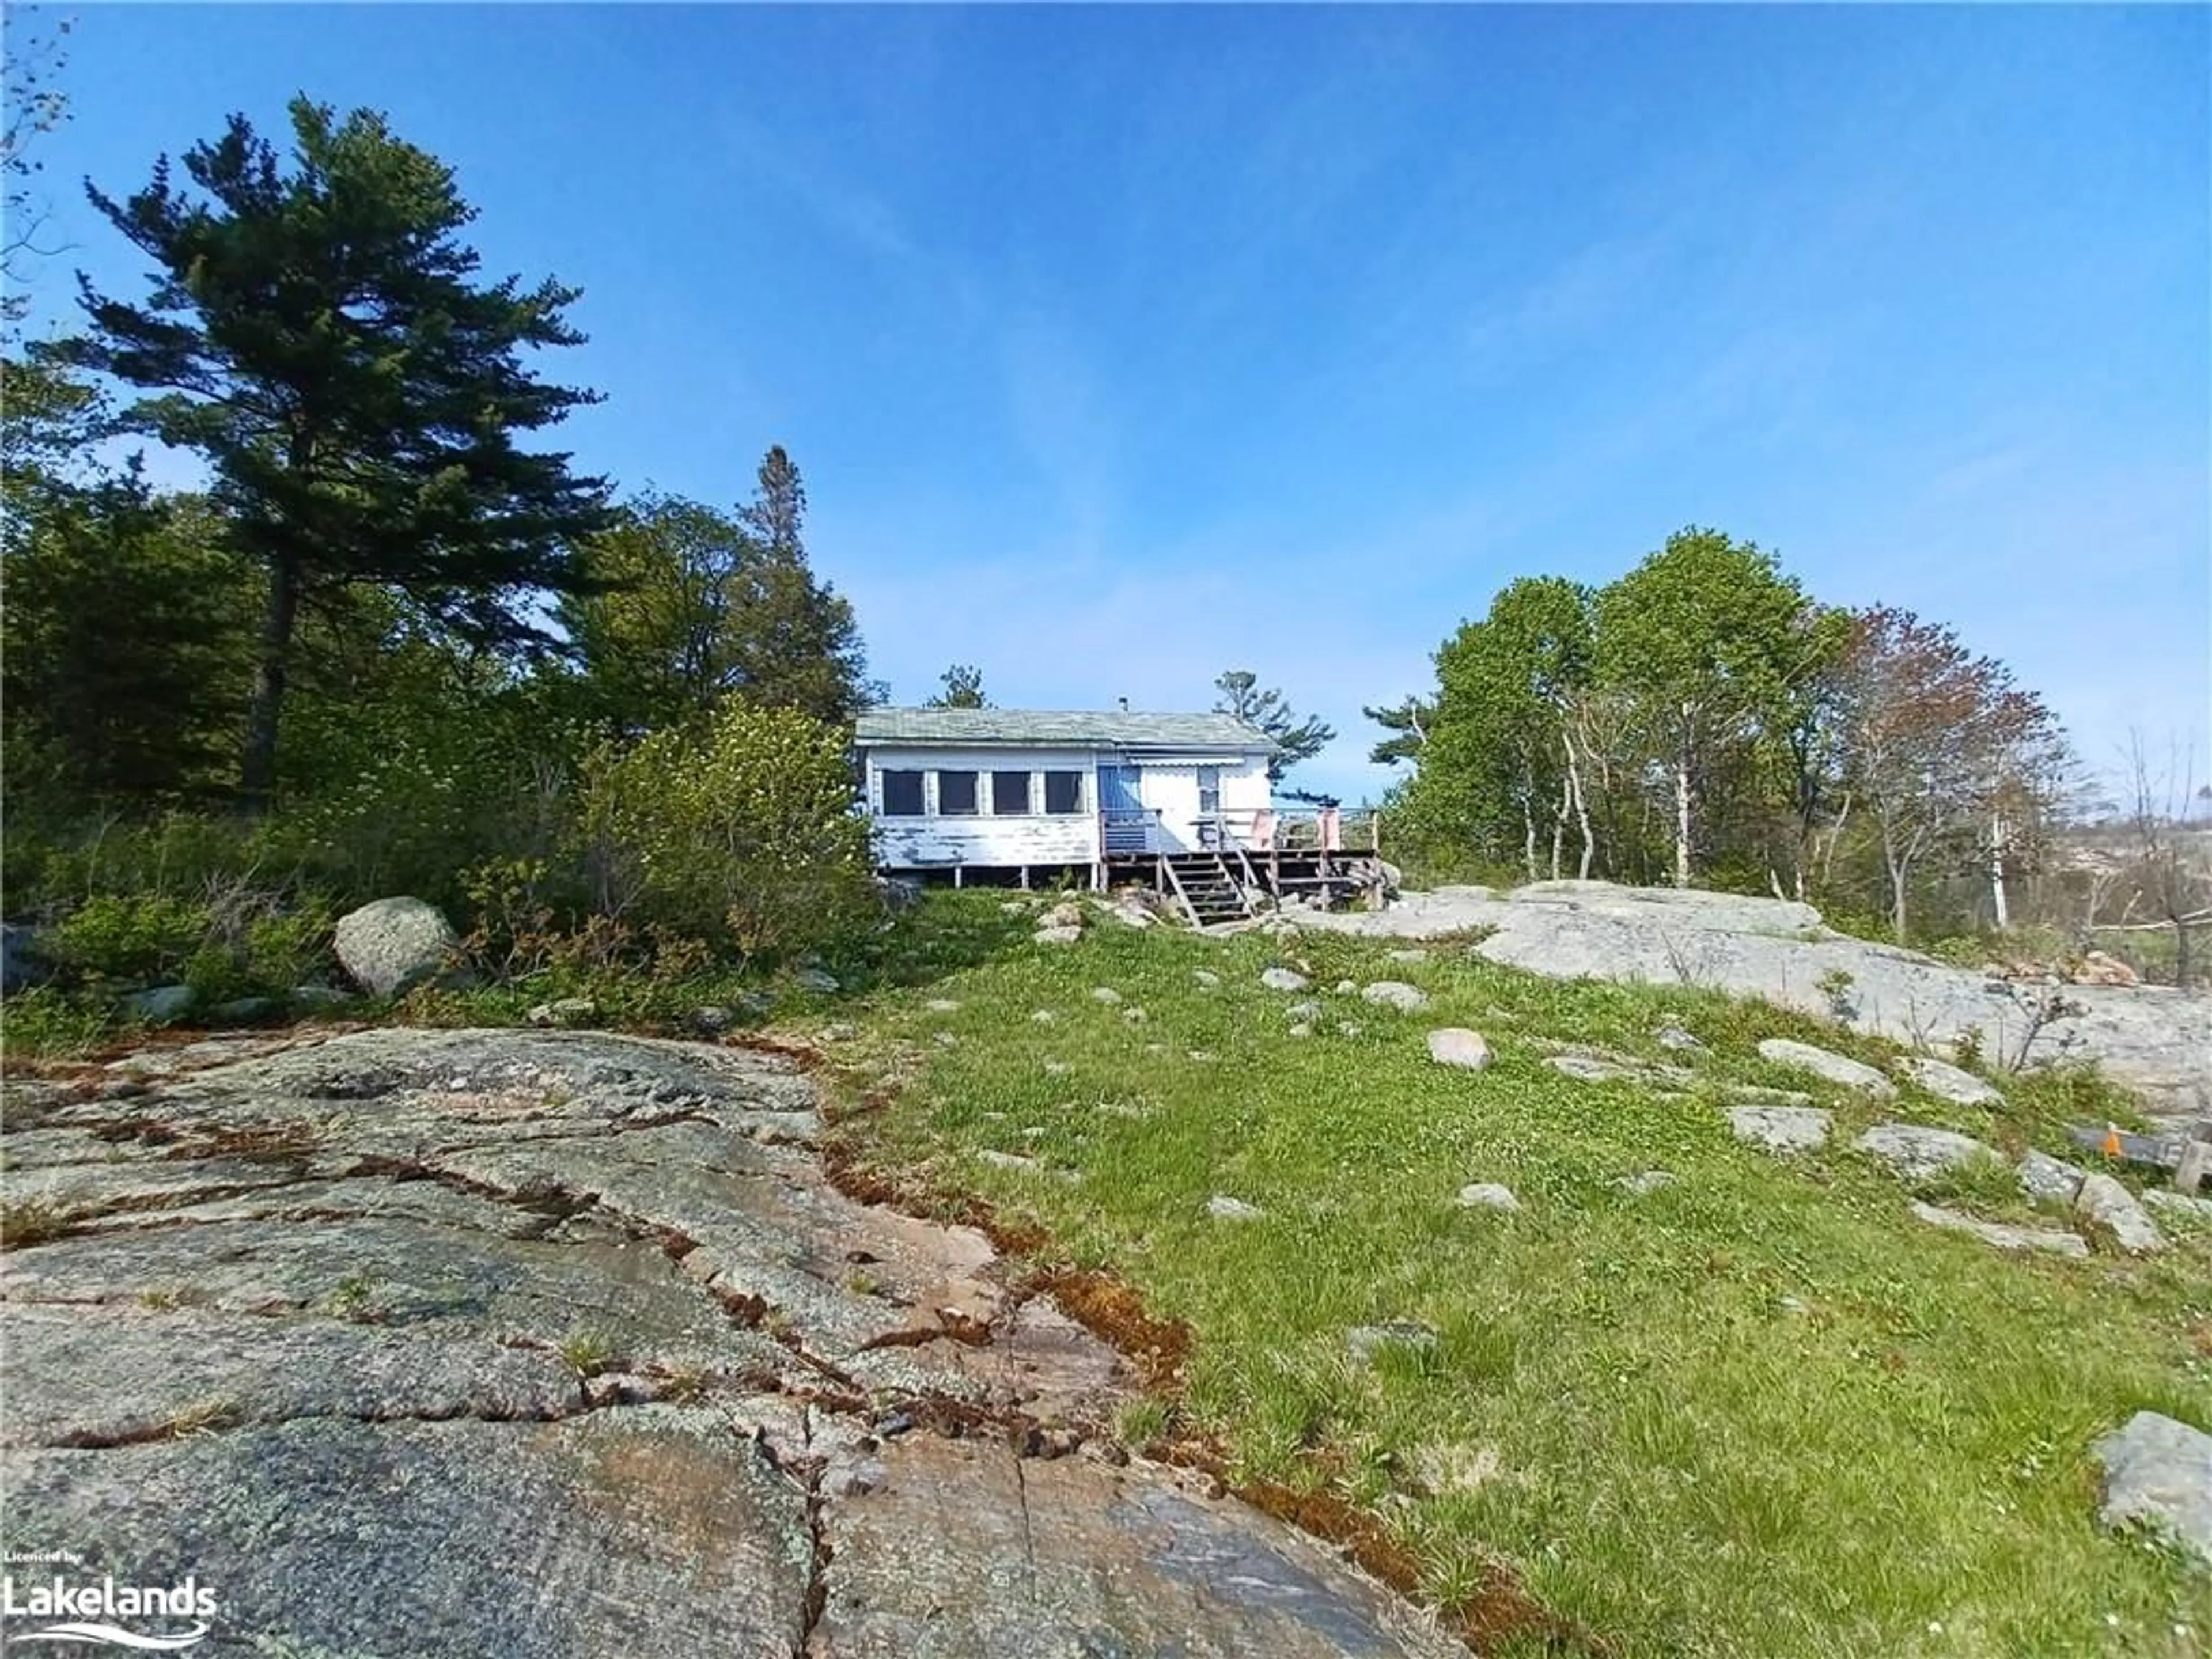 Cottage for AE545 Key River, Killarney Ontario P0G 1A0